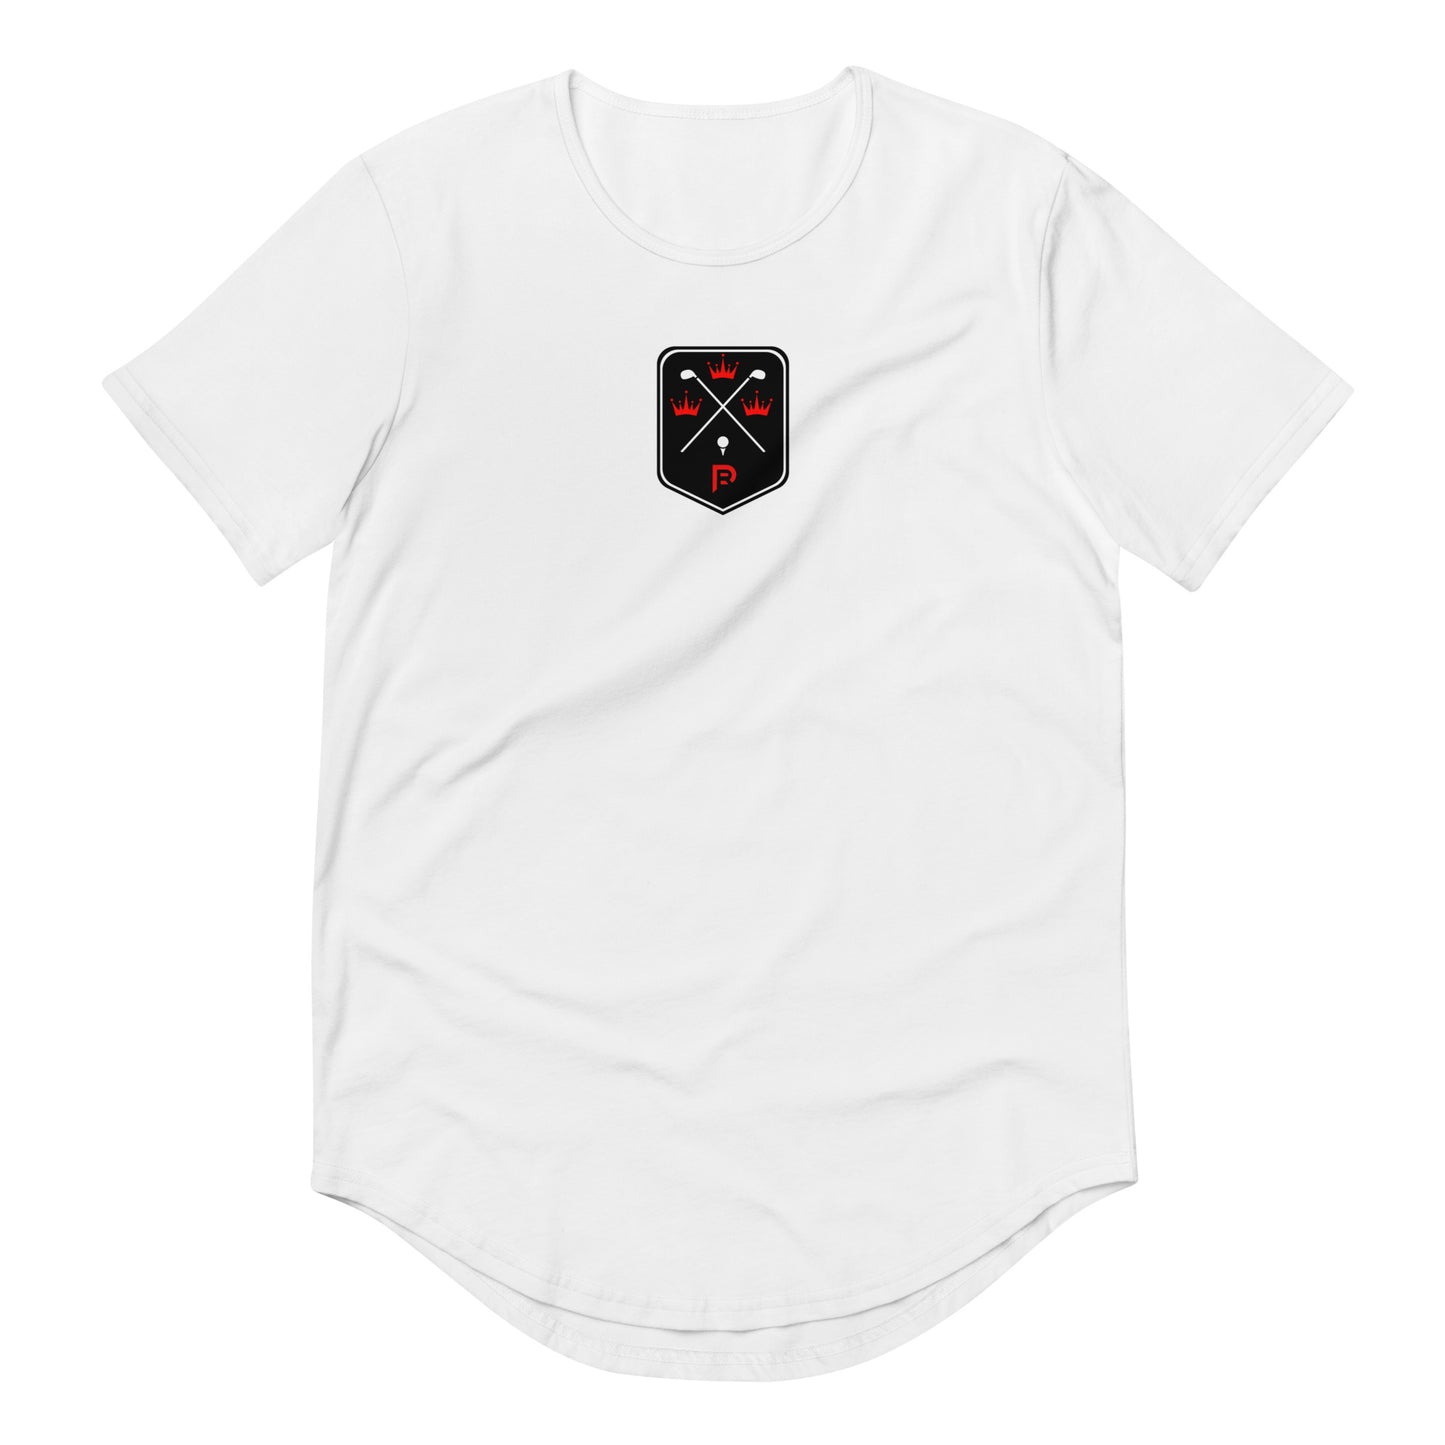 Red Weapon King Golf Curved Hem T-Shirt